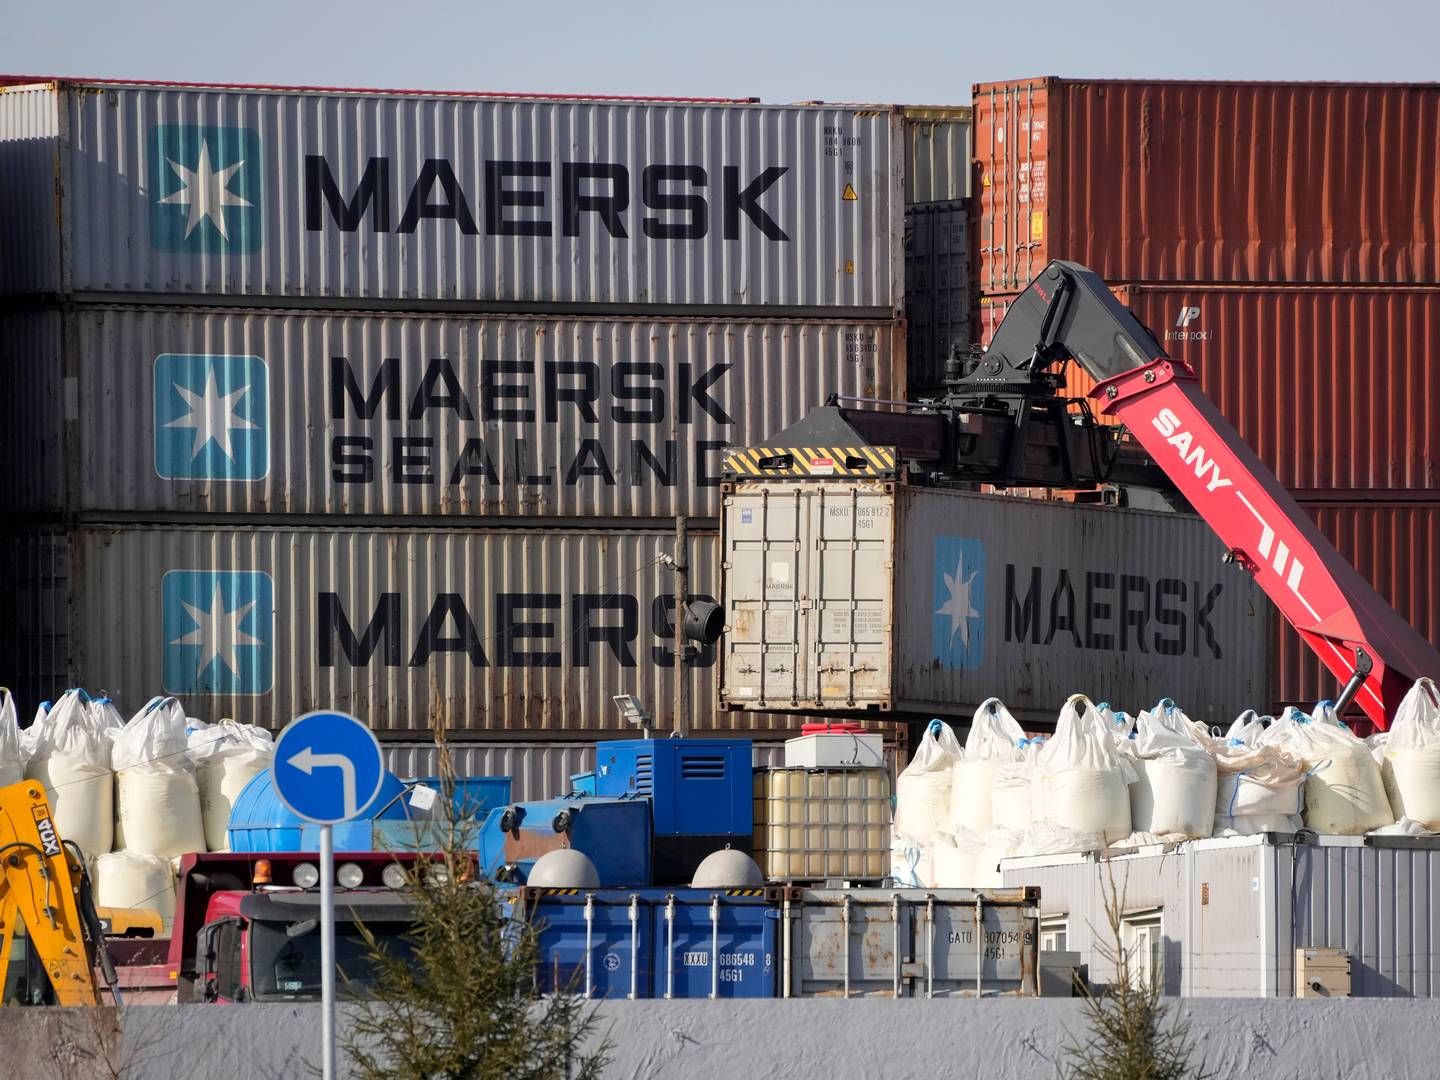 Maersk owned almost a third of the port company Global Ports, but sold its stake when Russia invaded Ukraine. Since then, the number of containers in the company's ports has dropped drastically. | Photo: Uncredited/AP/Ritzau Scanpix